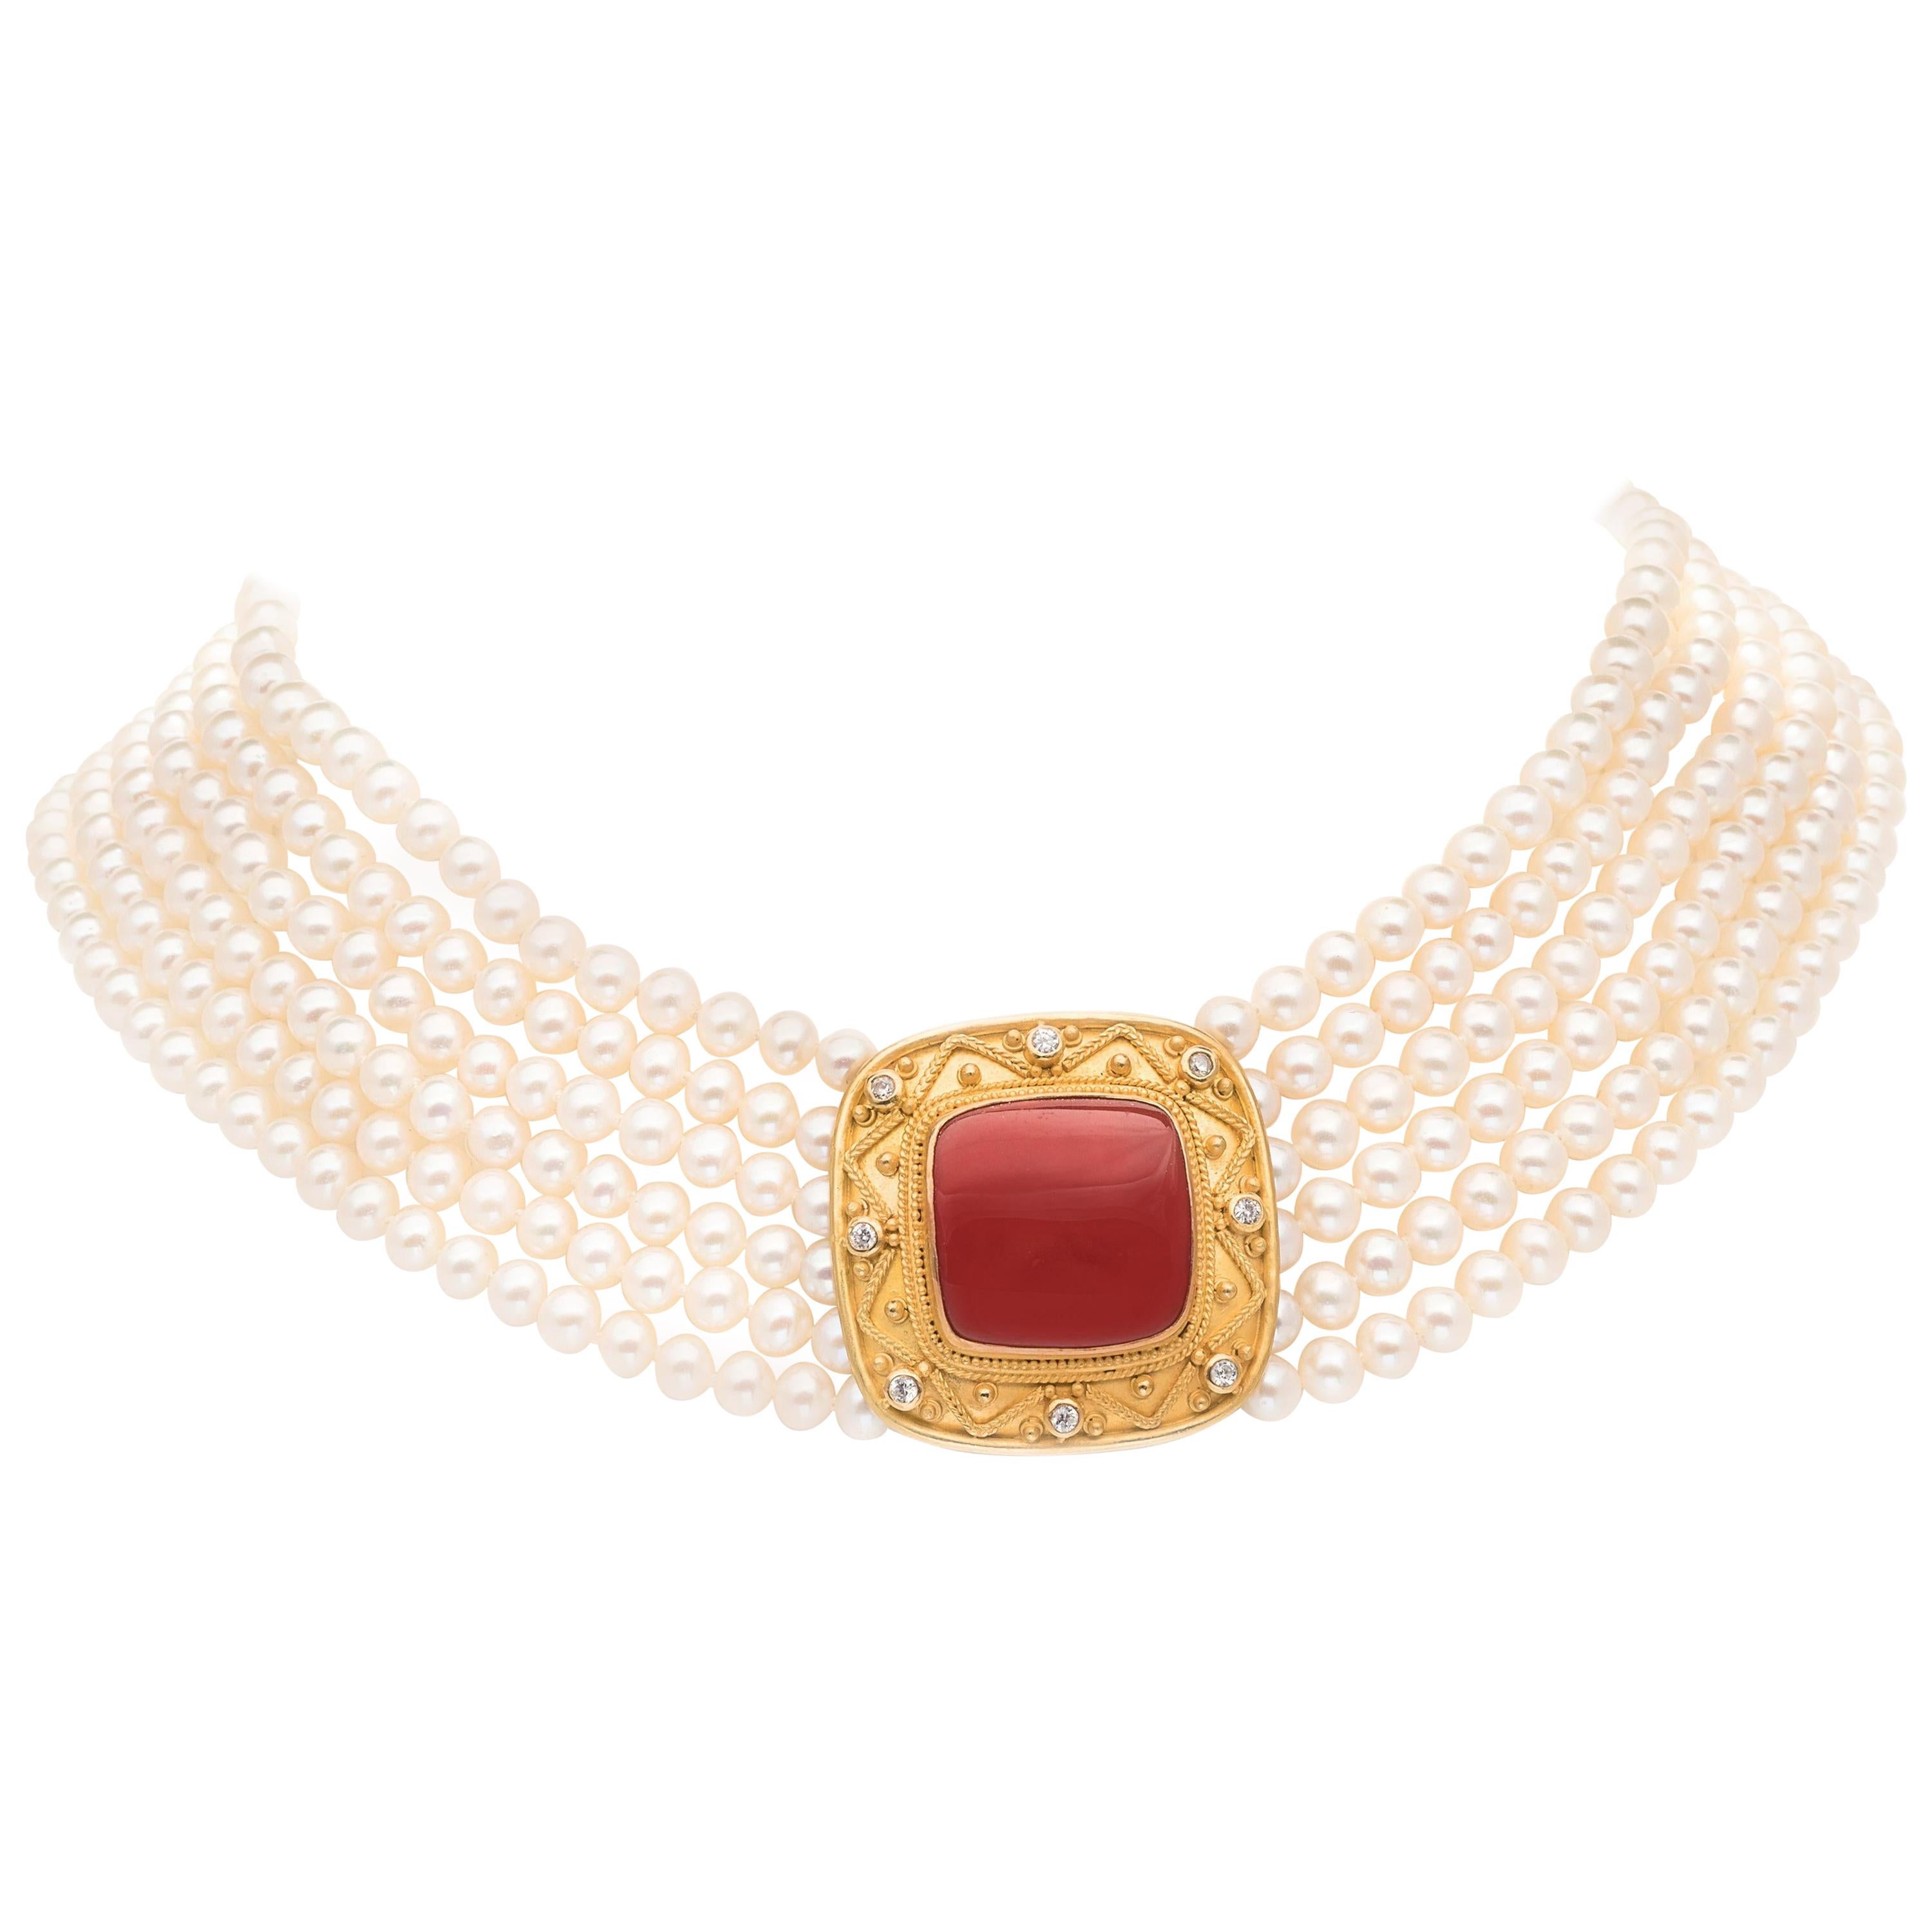 Carolyn Tyler 'Corinna Choker' White Pearl and Red Coral Necklace in 22k Gold